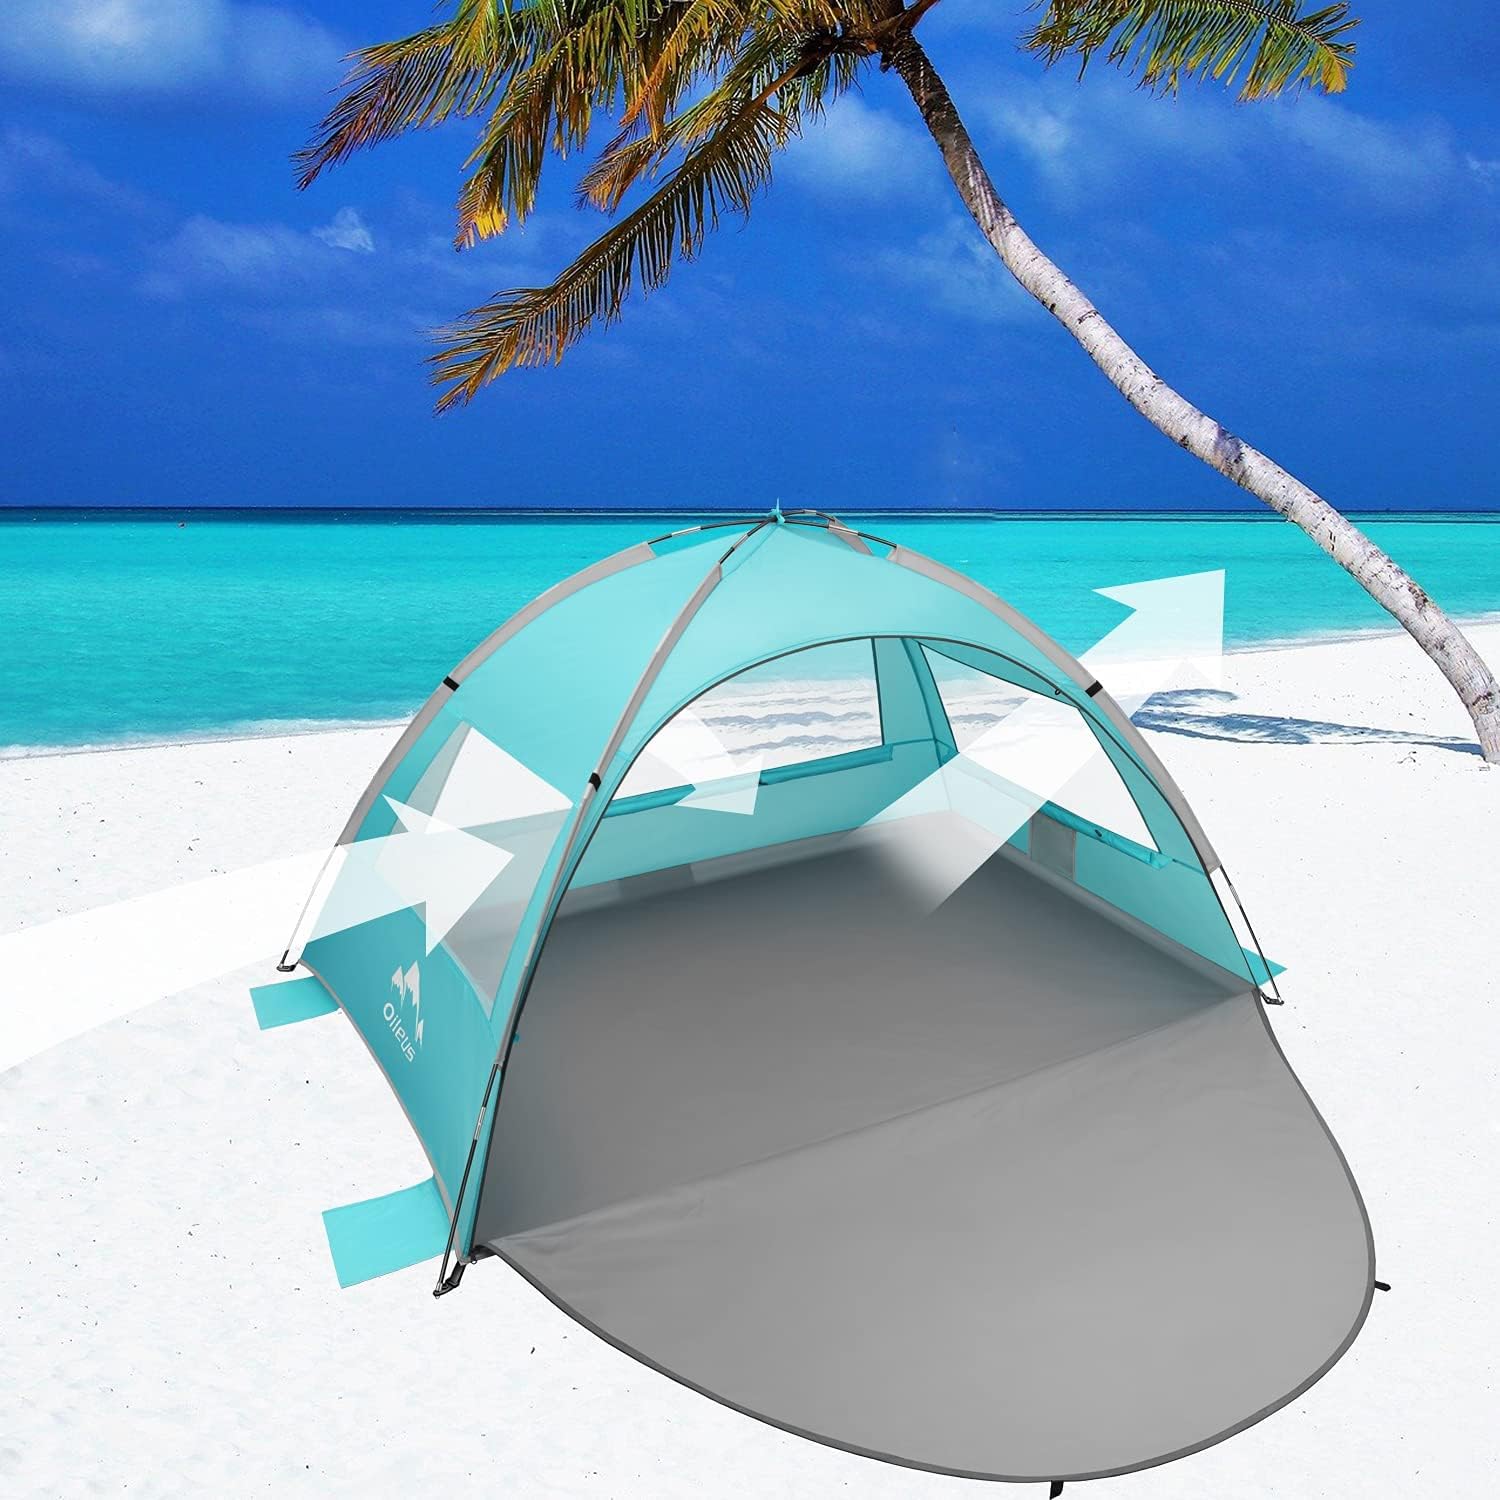 Oileus Beach Tent 2-3 Person Portable Sun Shade Shelter UV Protection, Extended Floor Ventilating Mesh Roll Up Windows Carrying Bag Stakes 6 Sand Pockets Fishing Hiking Camping,Blue